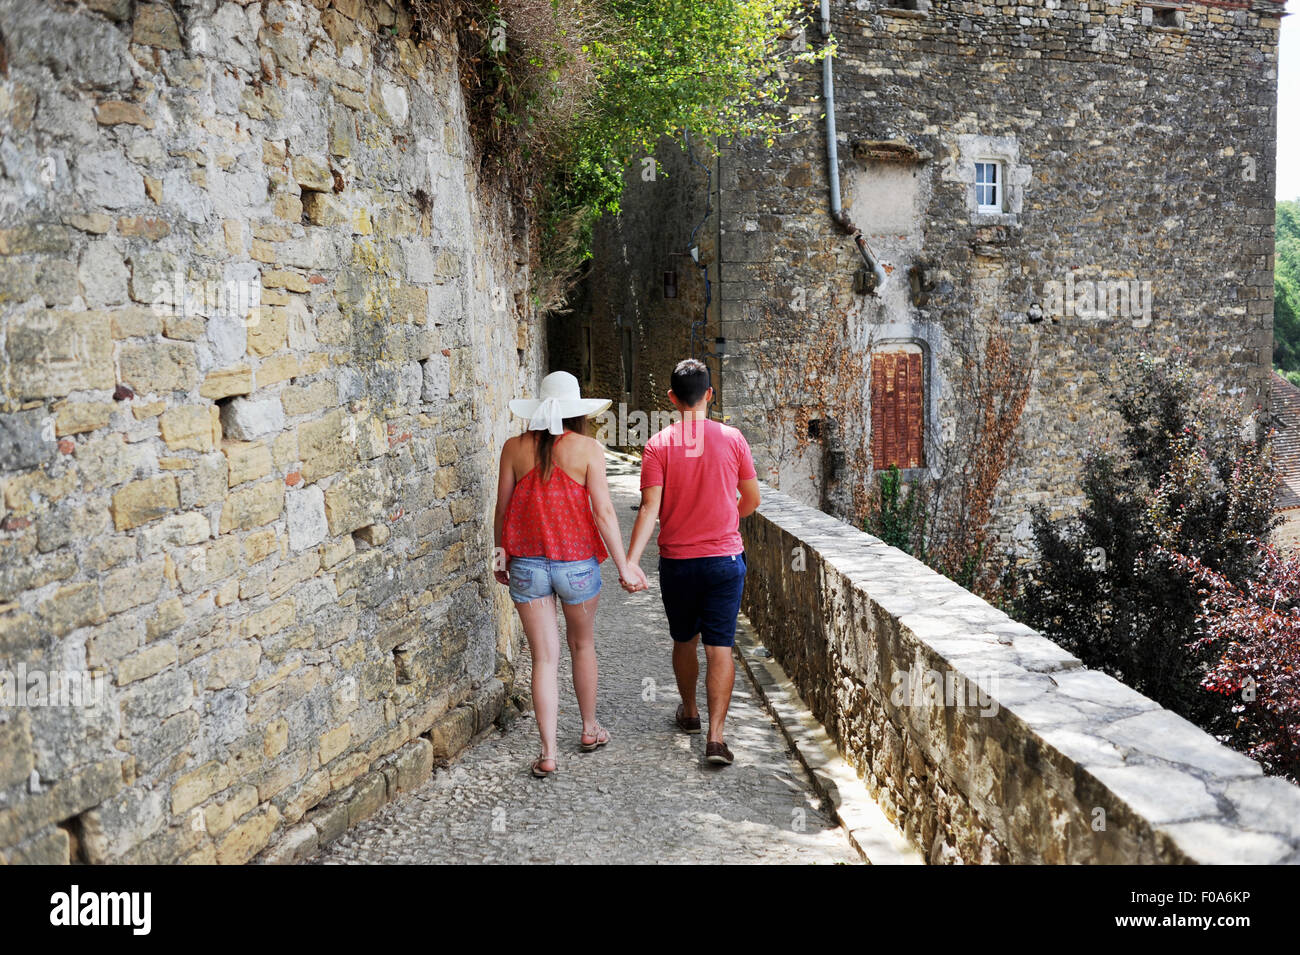 Young couple walking hand in hand on holiday through Puy l'Eveque in Midi Pyrenees region of France Stock Photo